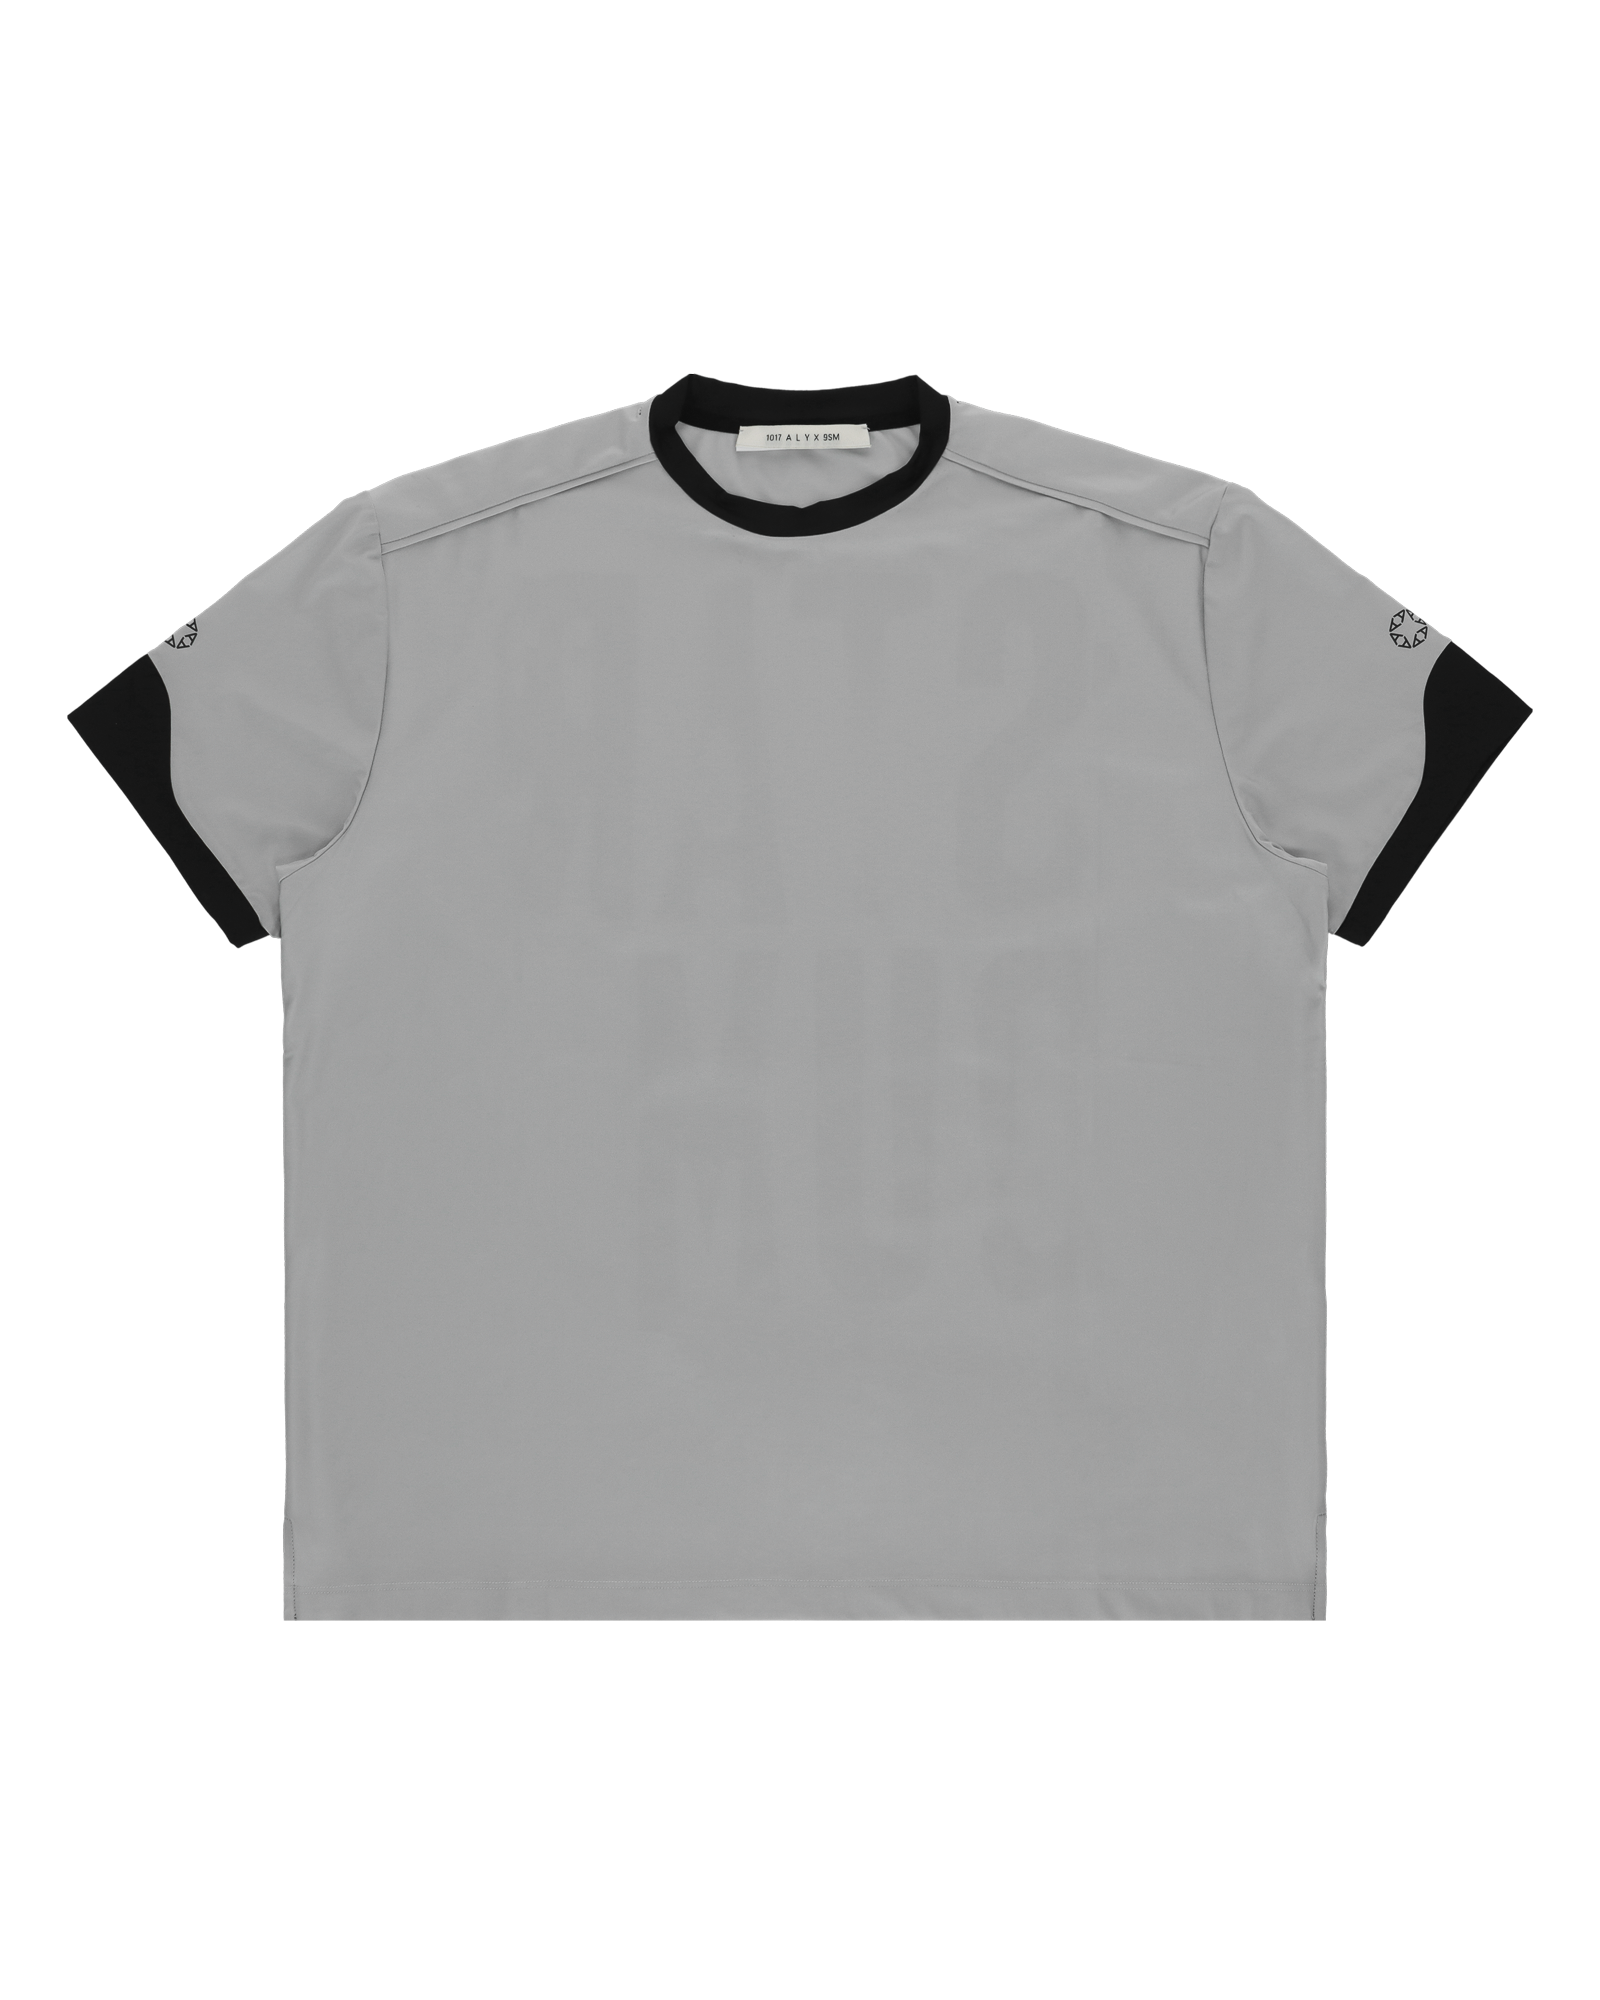 SHORT SLEEVE GRAPHIC SILVER T-SHIRT